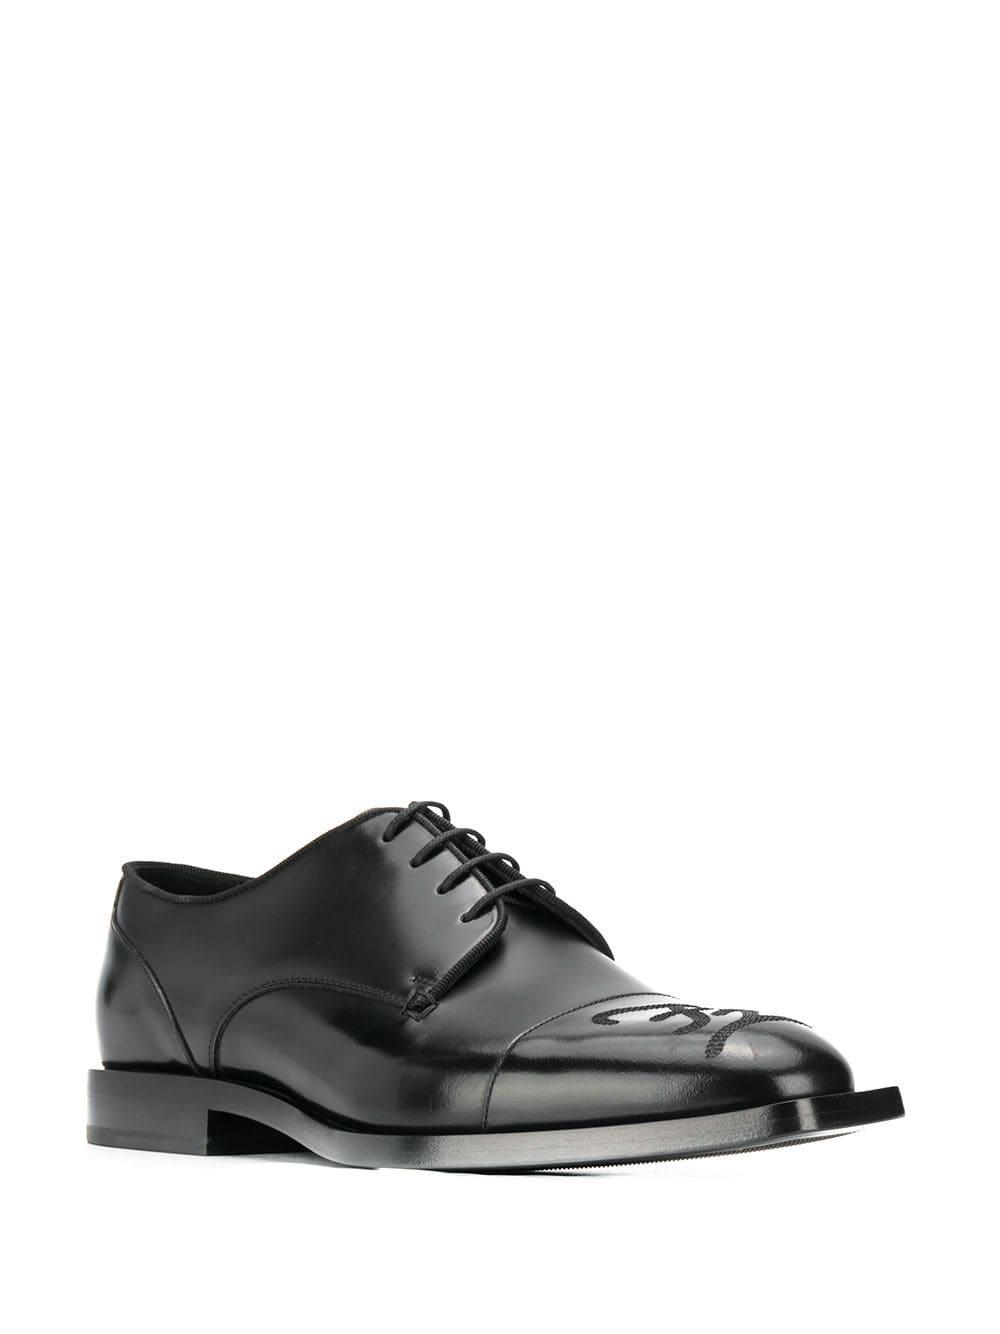 Fendi Leather Karligraphy Derby Shoes in Black for Men - Save 4% - Lyst